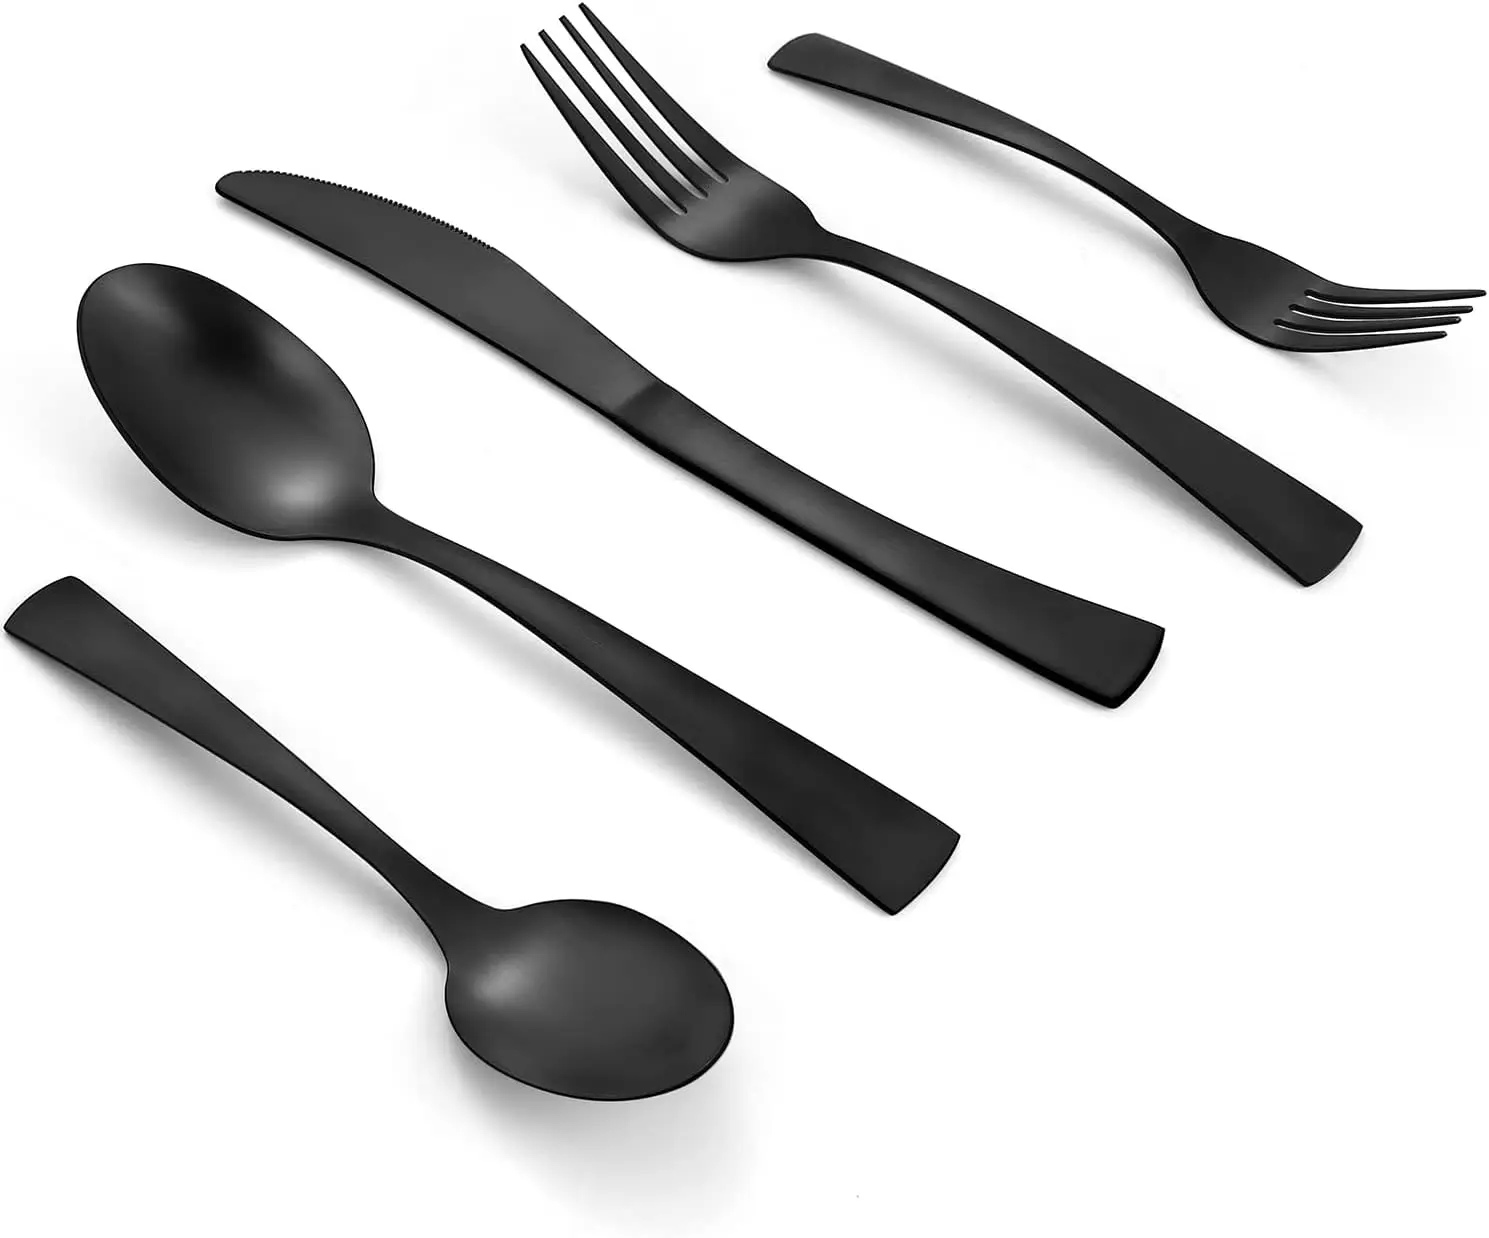 https://ae01.alicdn.com/kf/S31006580761946be92c2929c8f37da0bc/Matte-Black-Silverware-Set-40-Piece-Stainless-Steel-Flatware-Set-Set-Service-for-8-Include-Knives.jpg